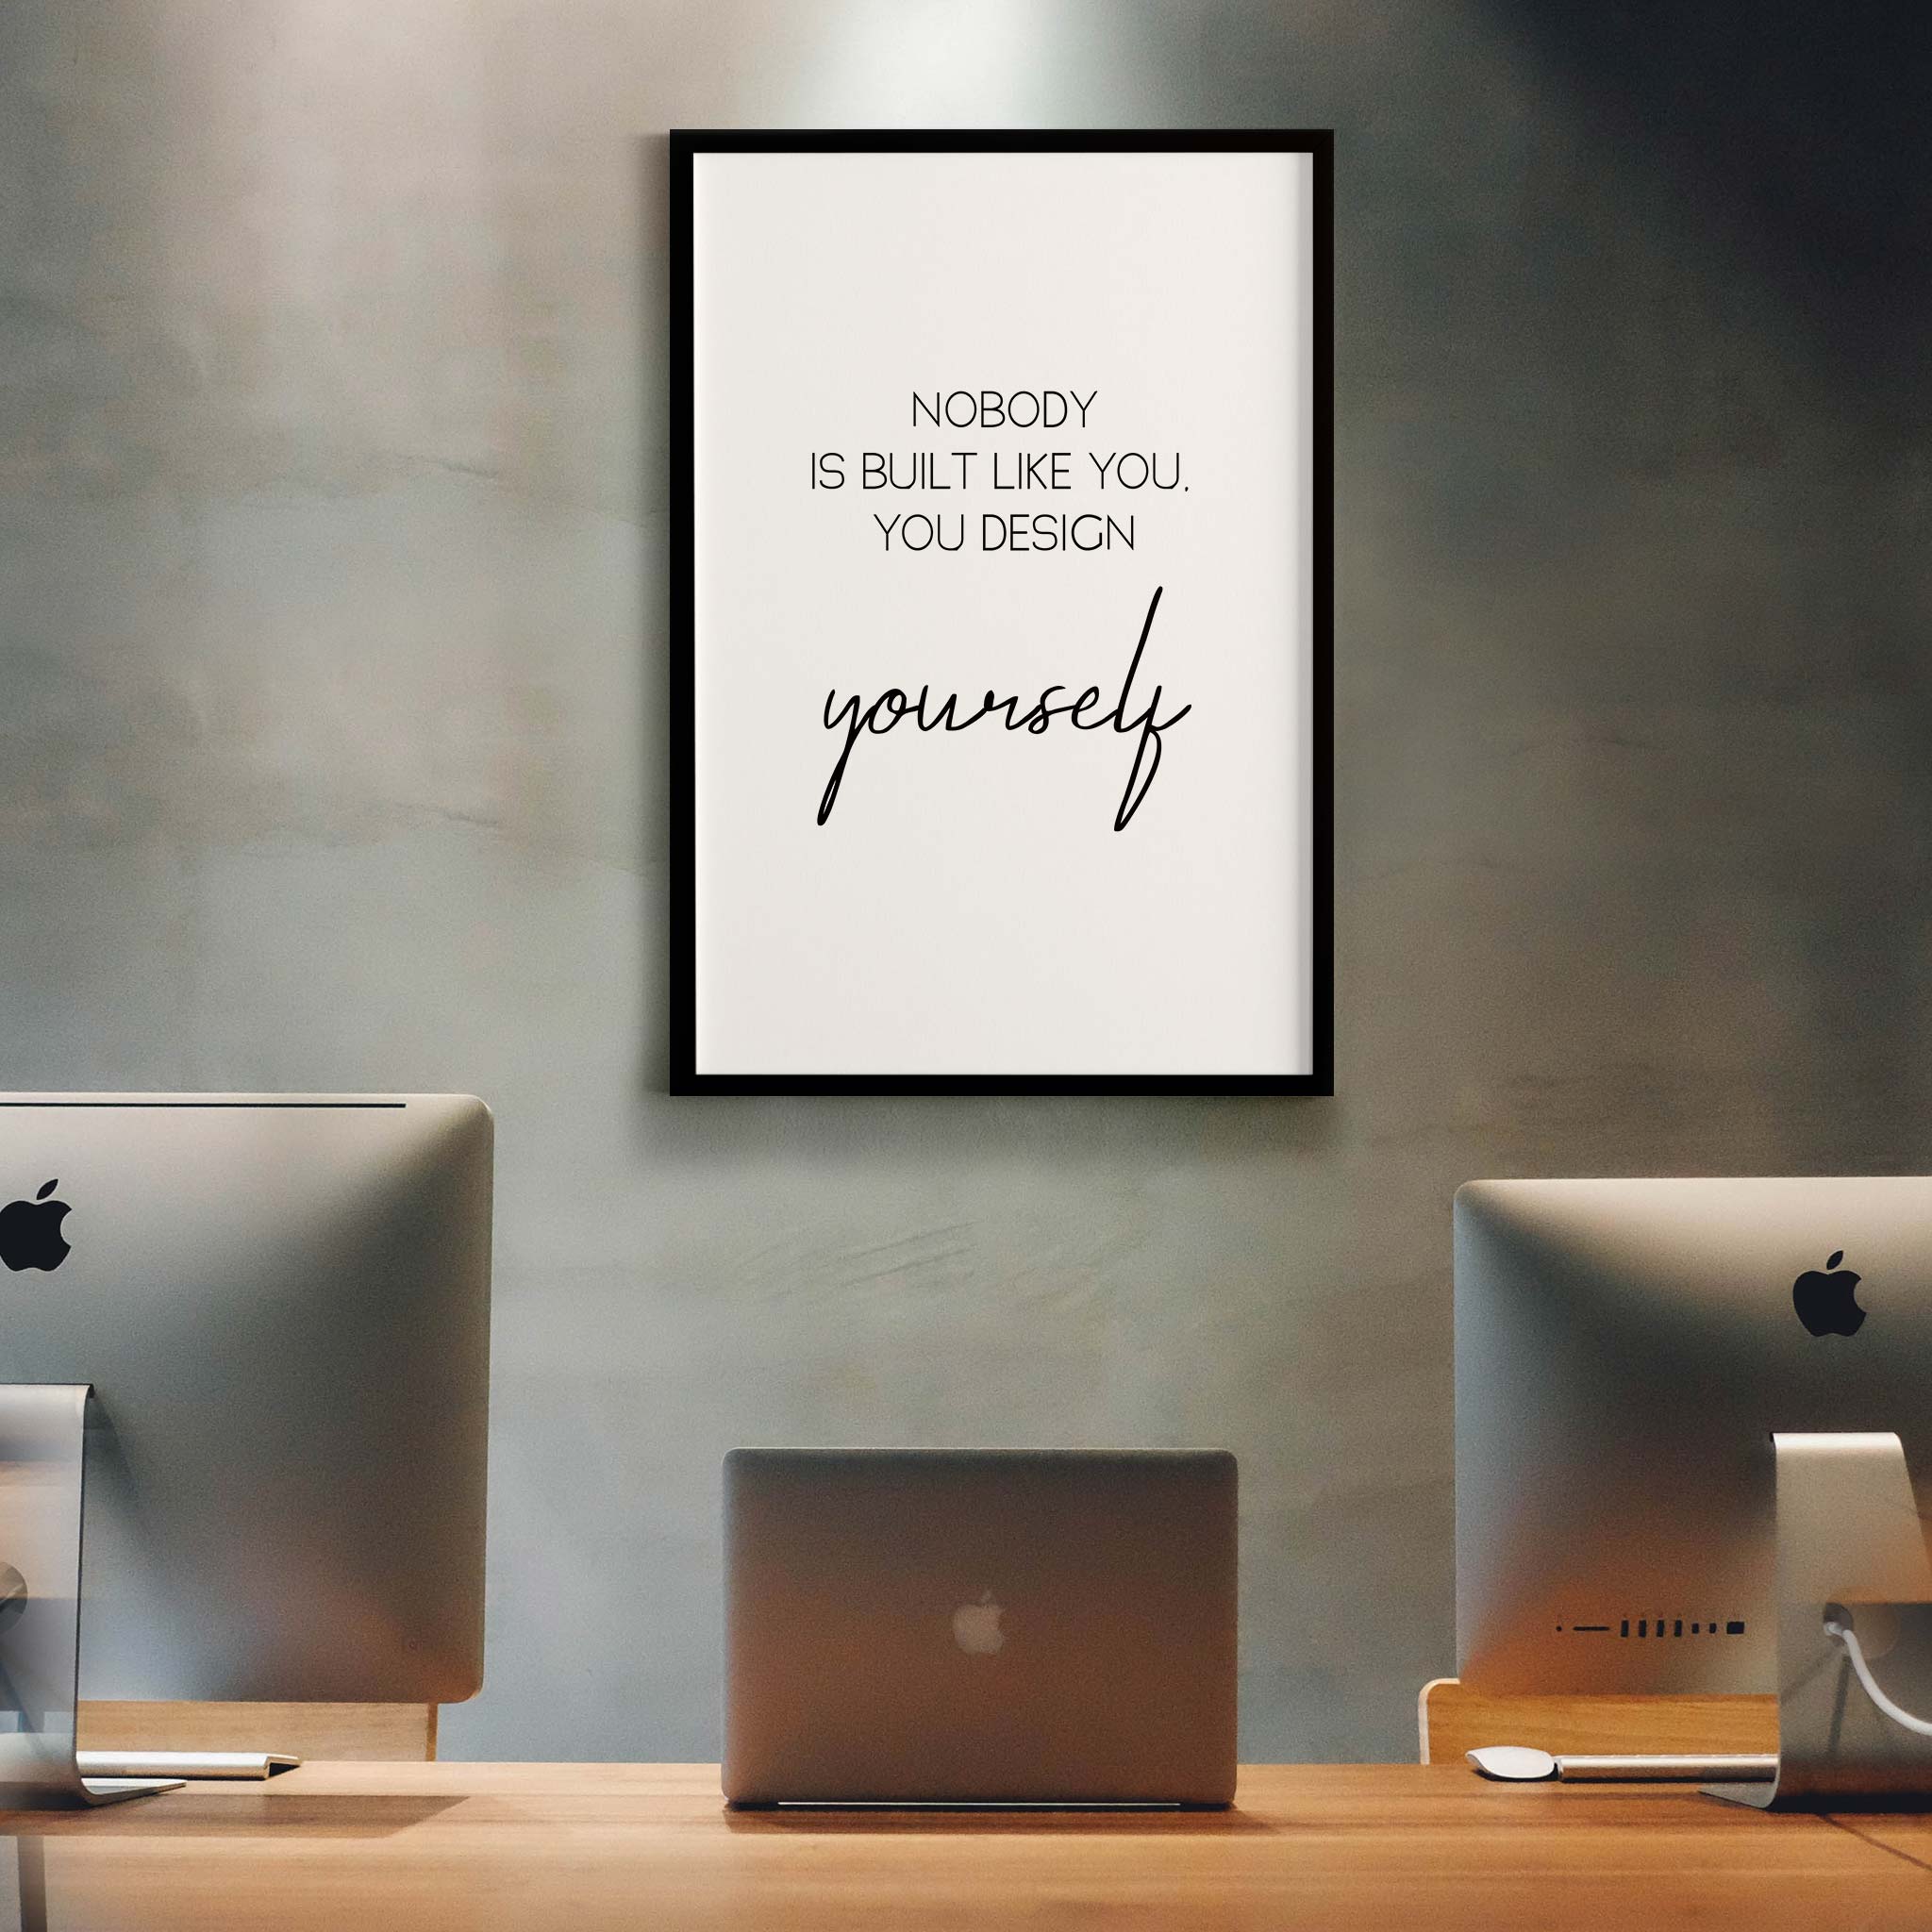 Nobody is built like you, you design yourself